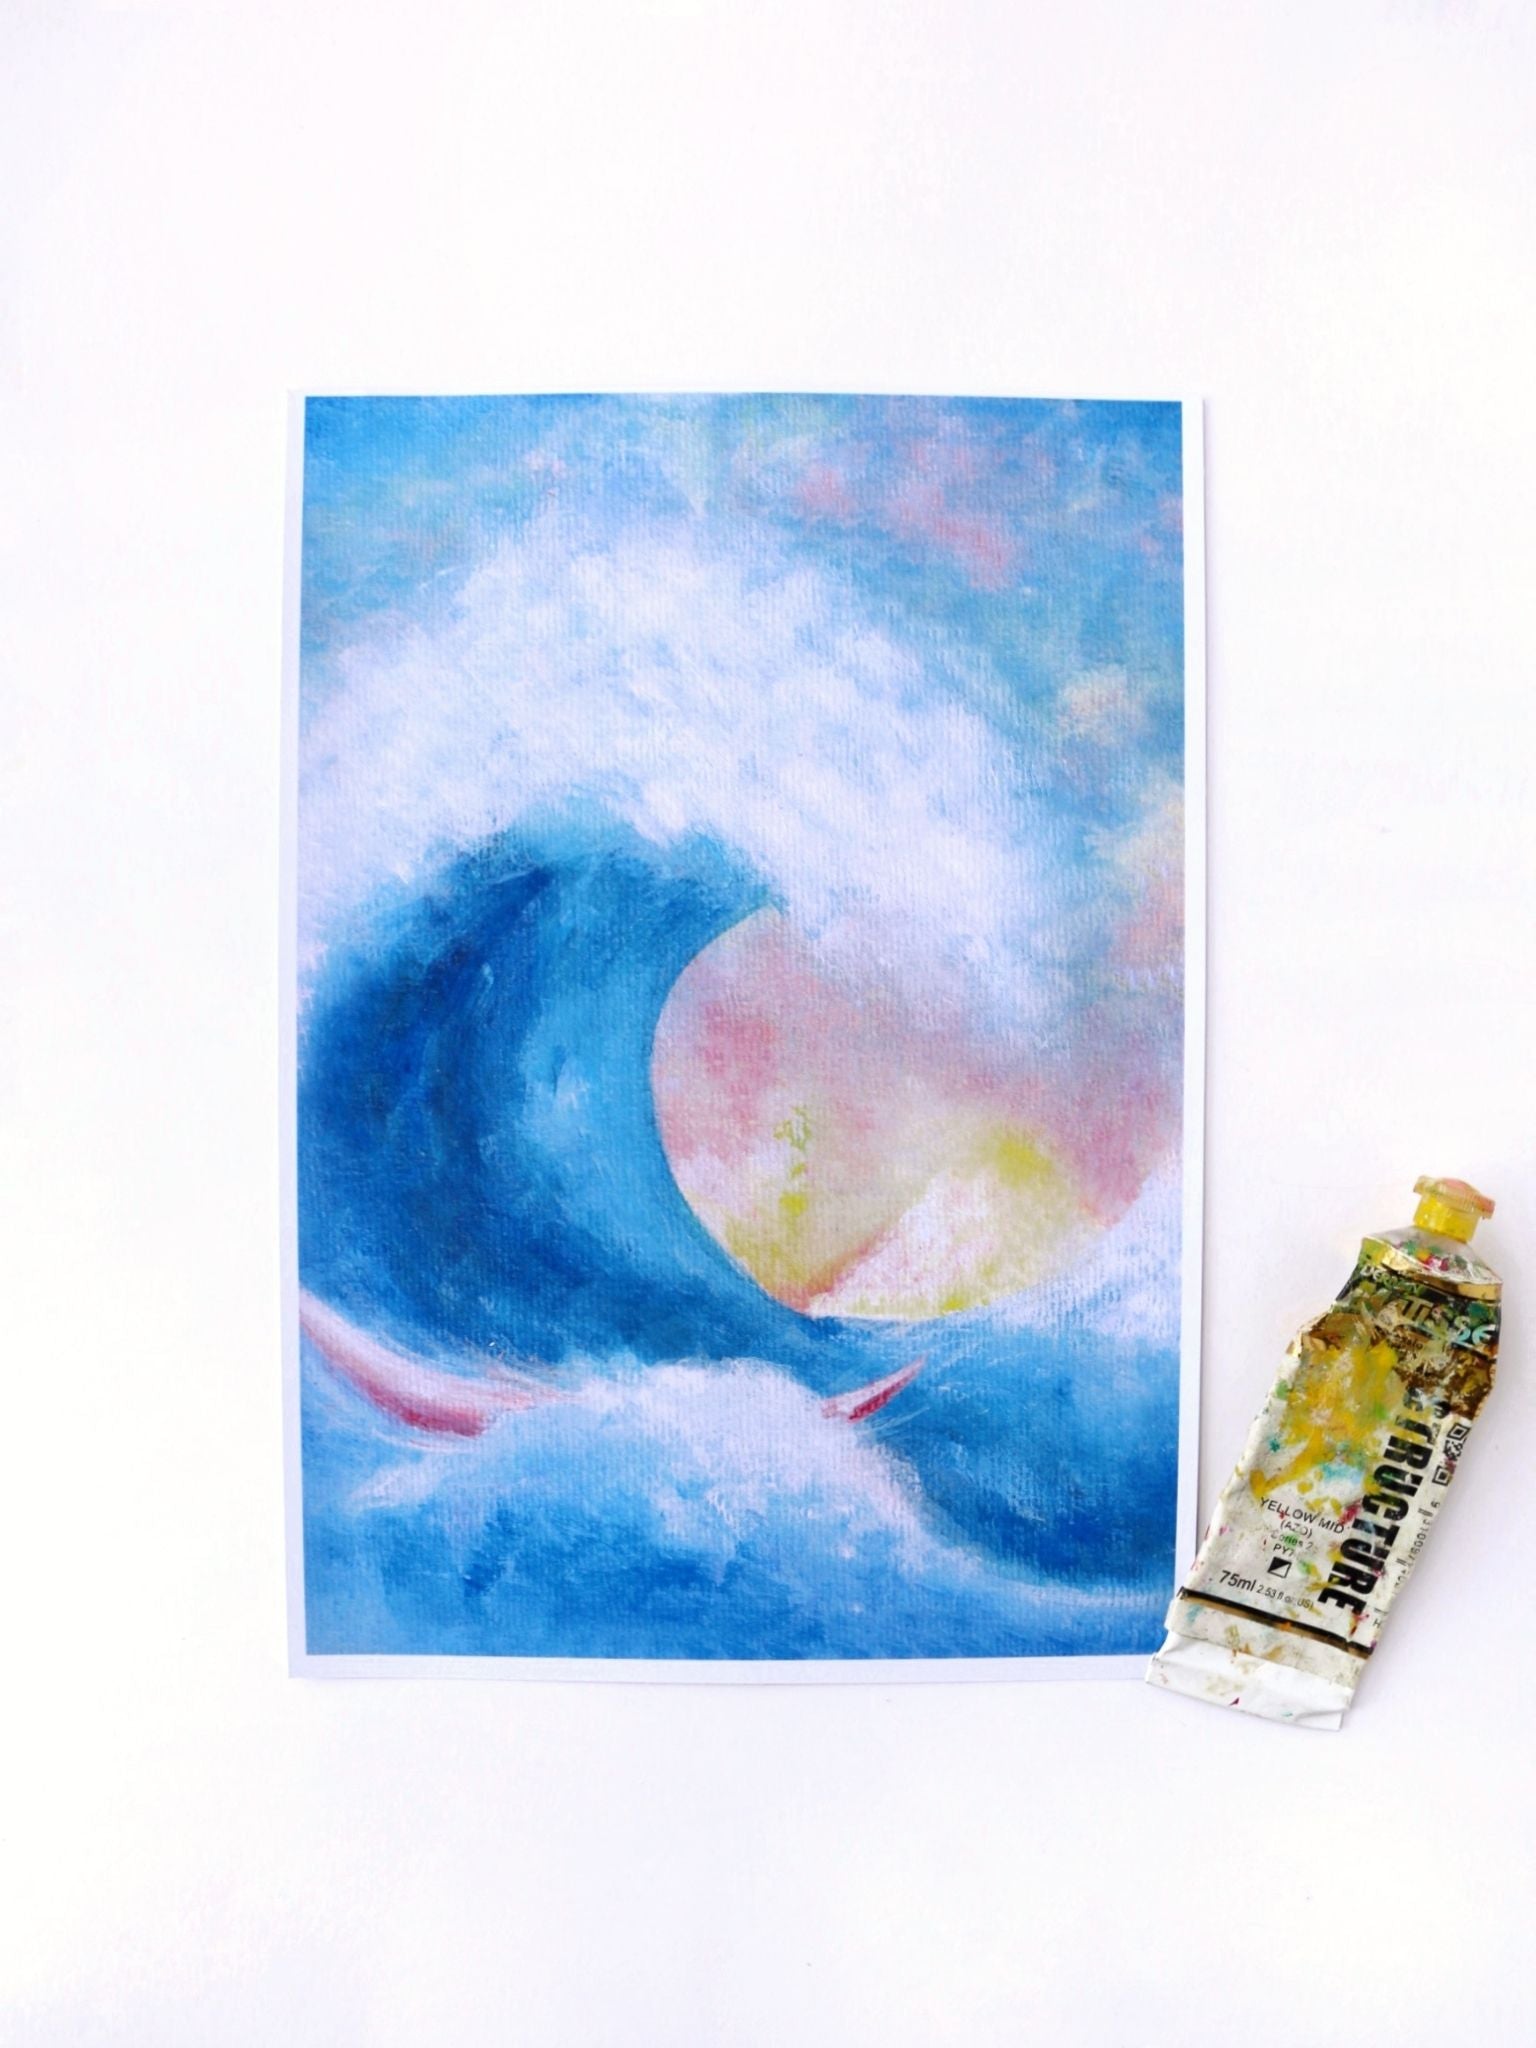 great-wave-inspired-acrylic-painting-with-big-blue-wave-white-sea-foam-and-small-boat-art-print